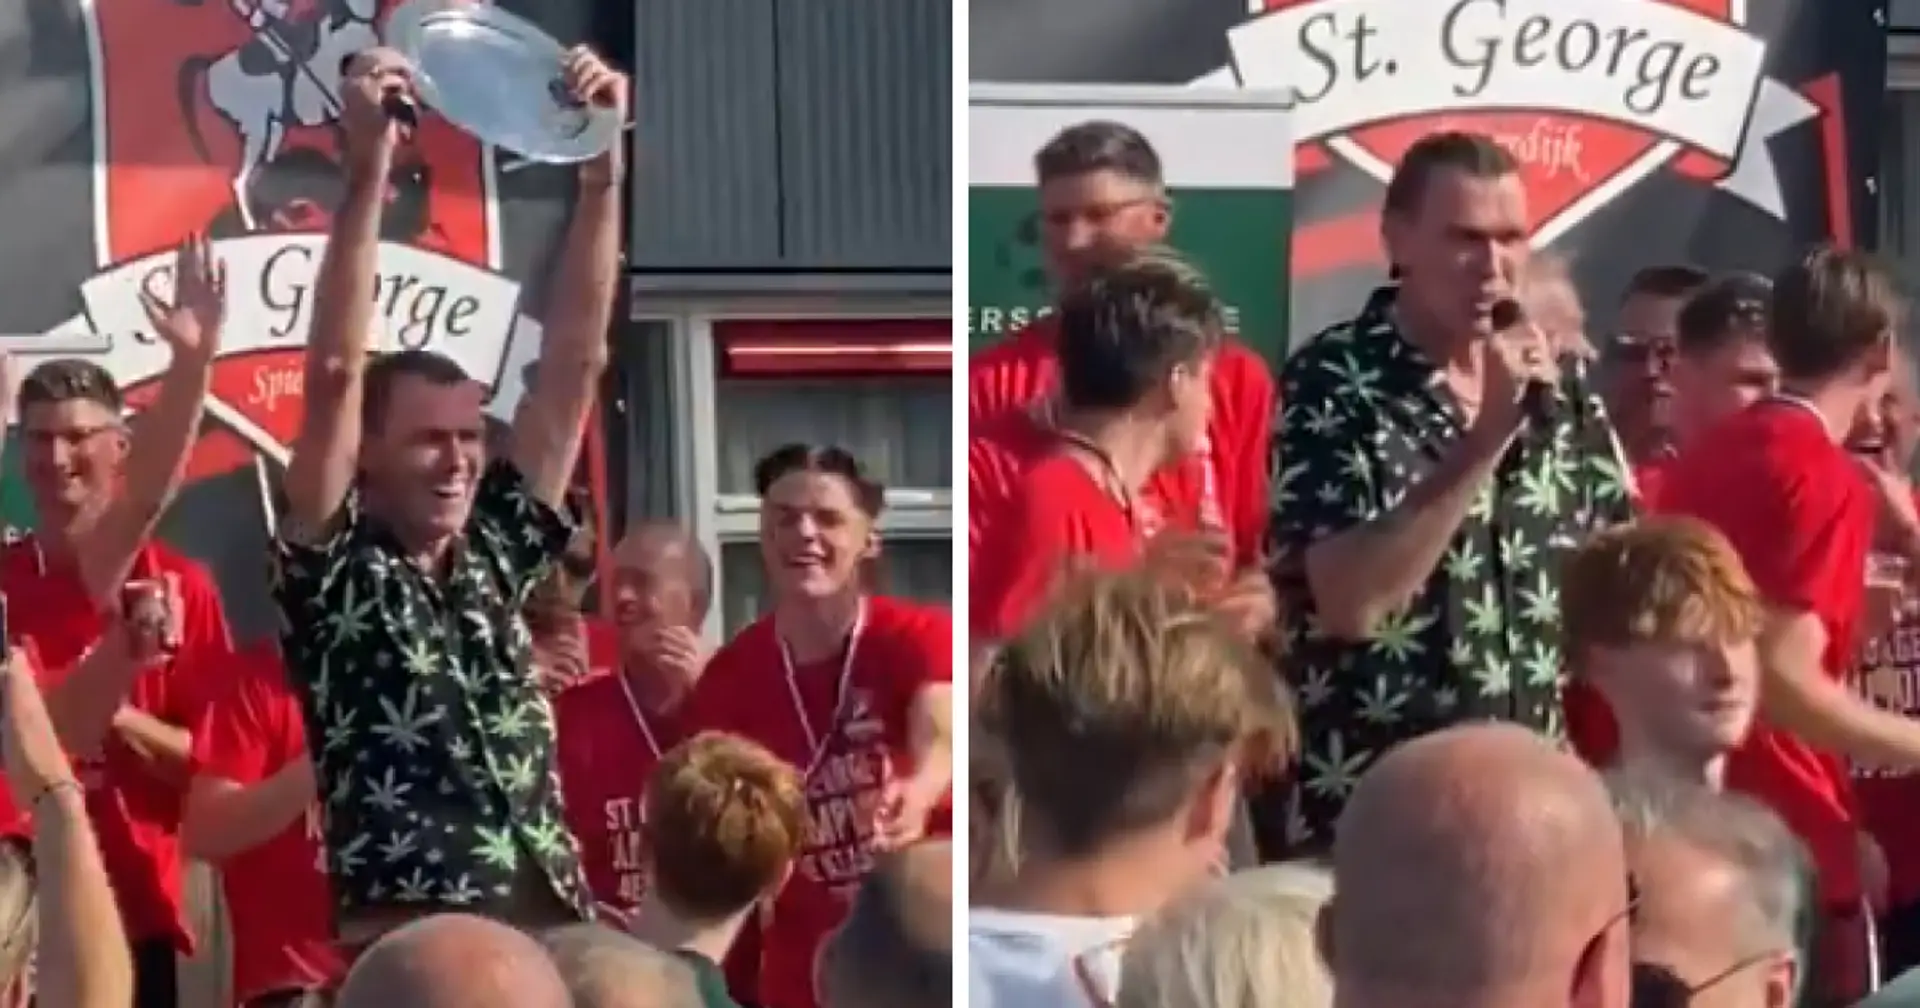 Dutch referee banned for life after holding the trophy and singing with the winning team 